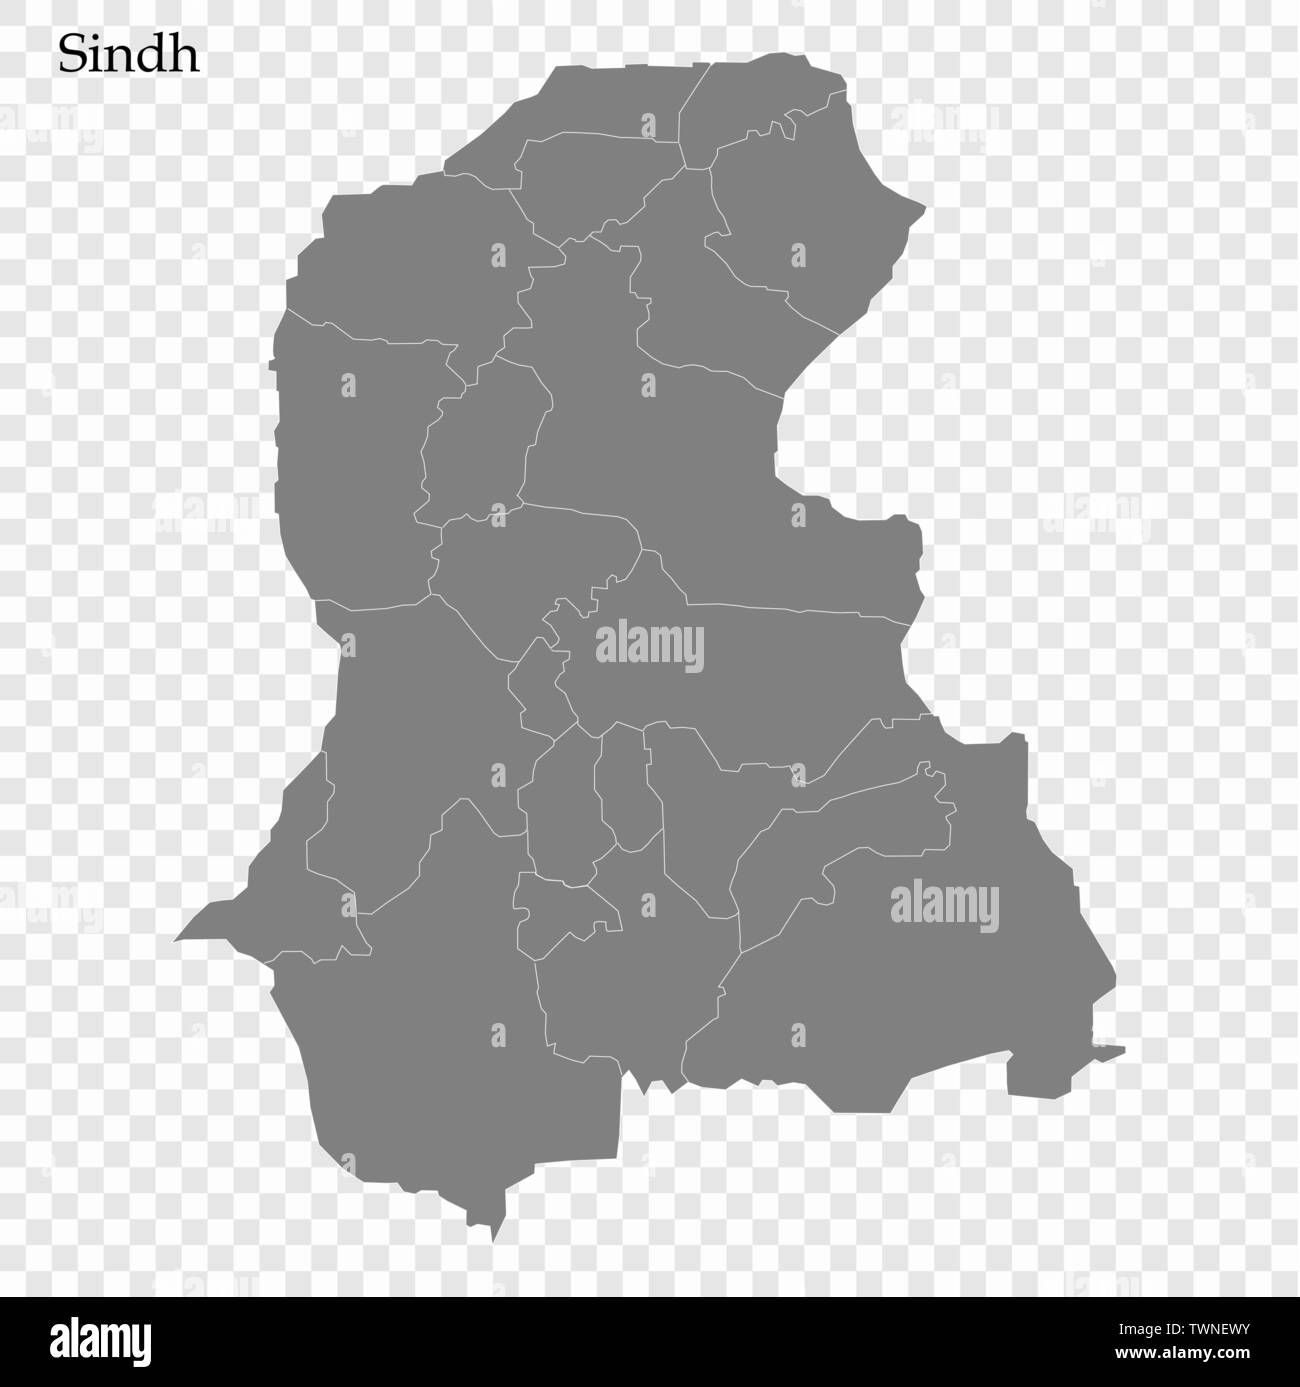 High Quality map of Sindh is a province of Pakistan, with borders of the divisions Stock Vector